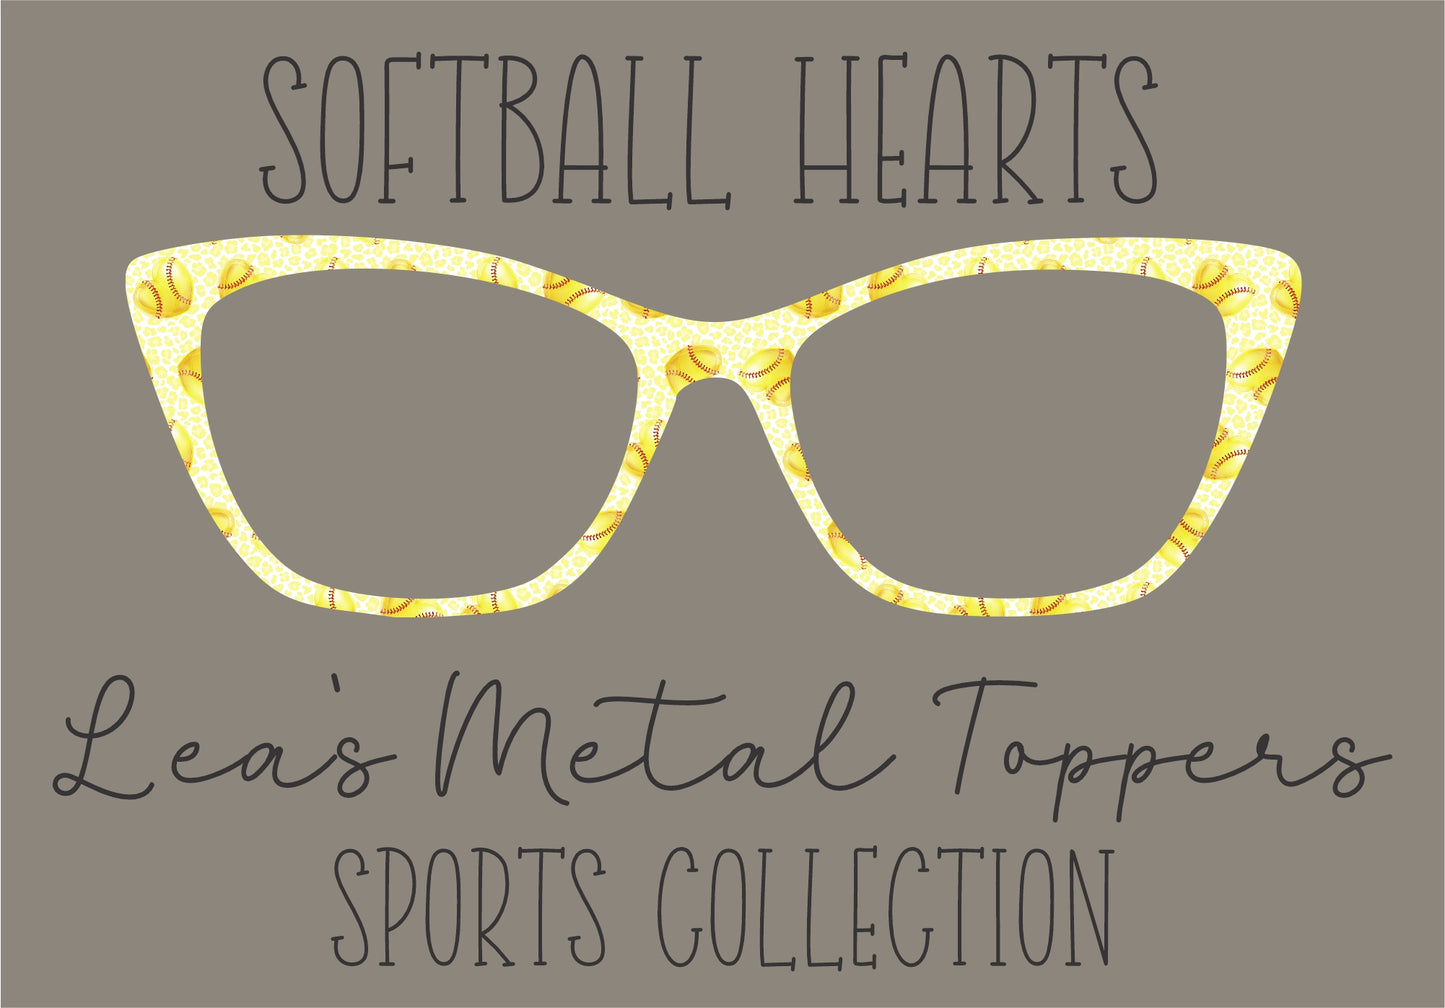 SOFTBALL HEARTS Eyewear Frame Toppers COMES WITH MAGNETS